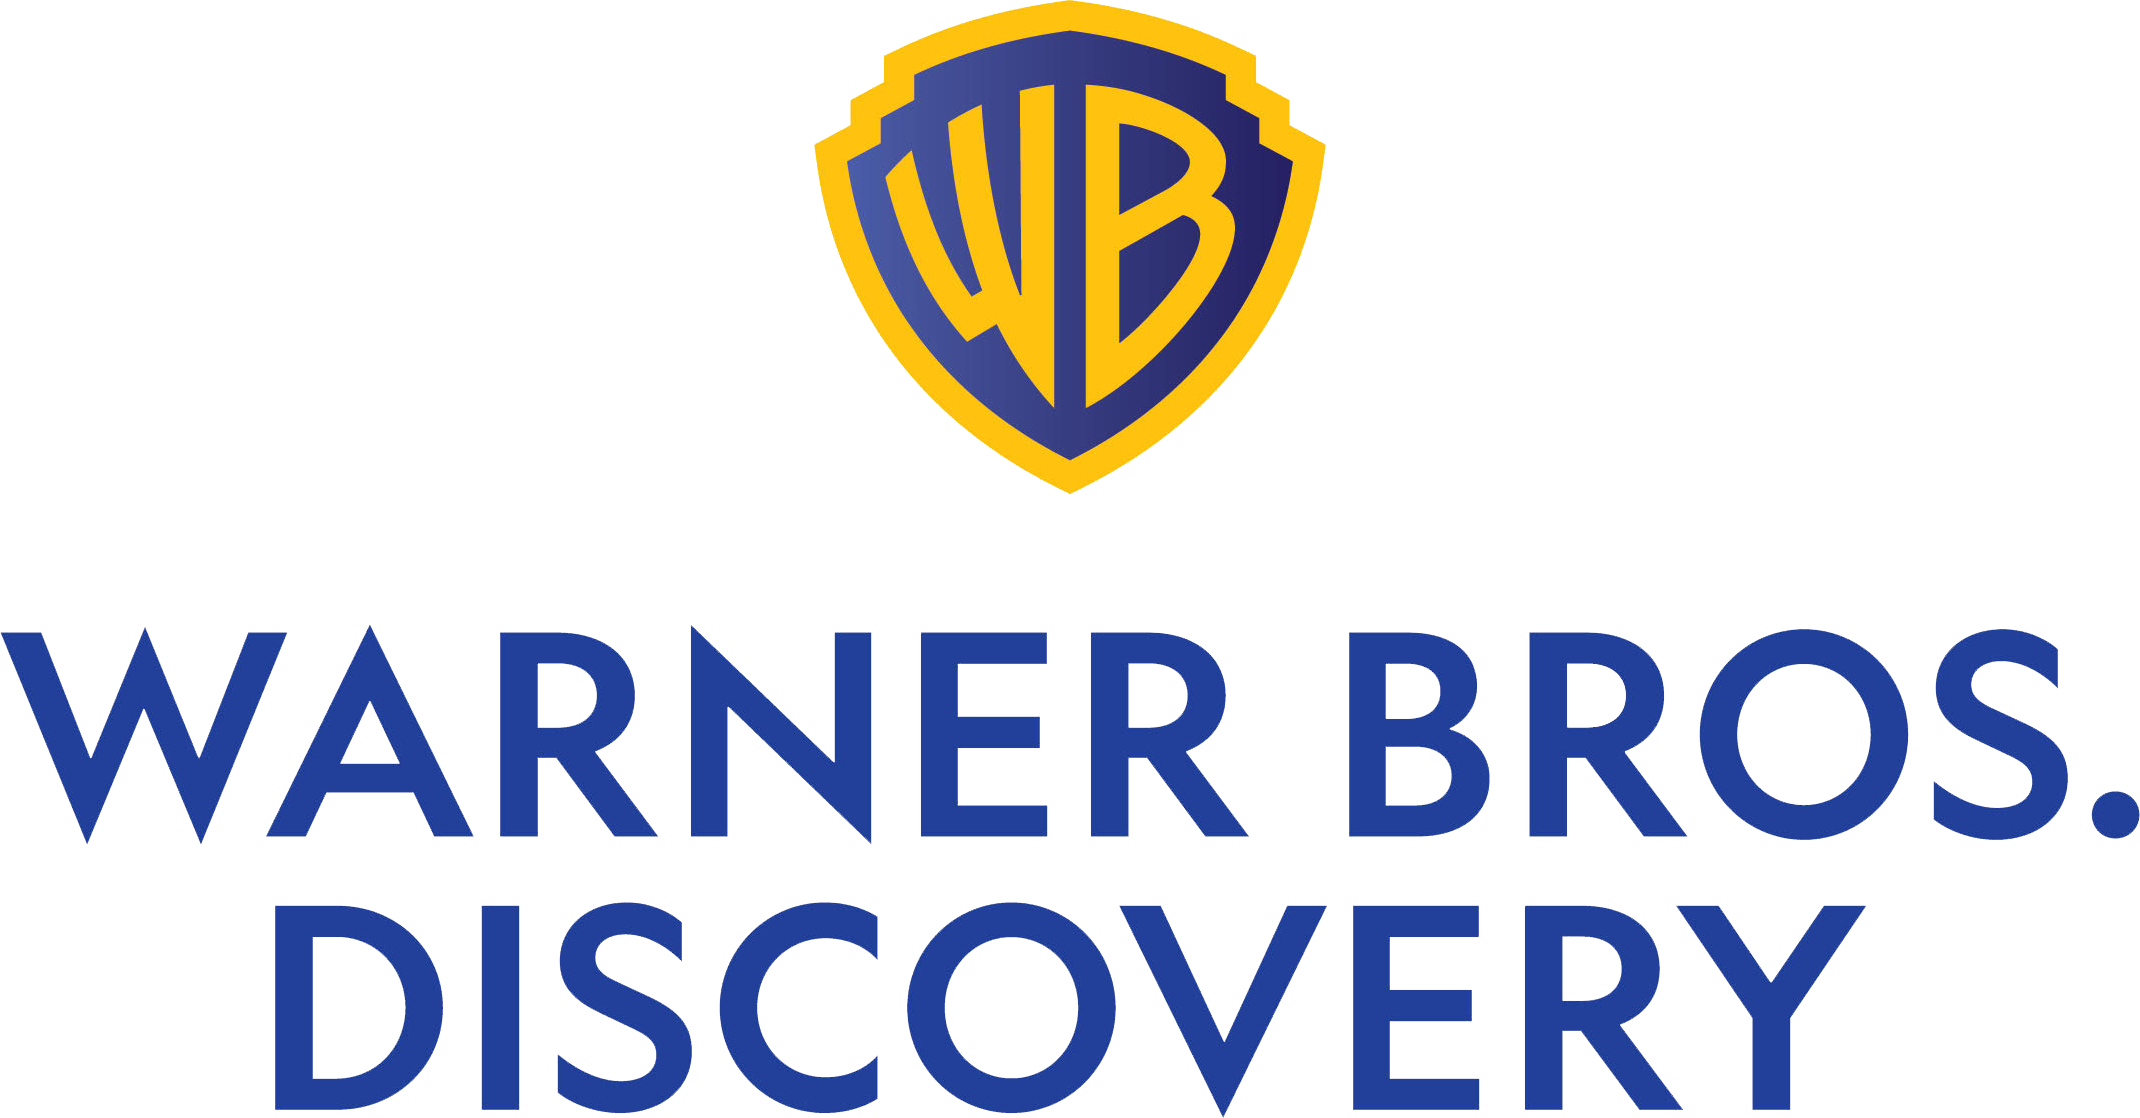 Warner officially has another new owner in Discovery Networks